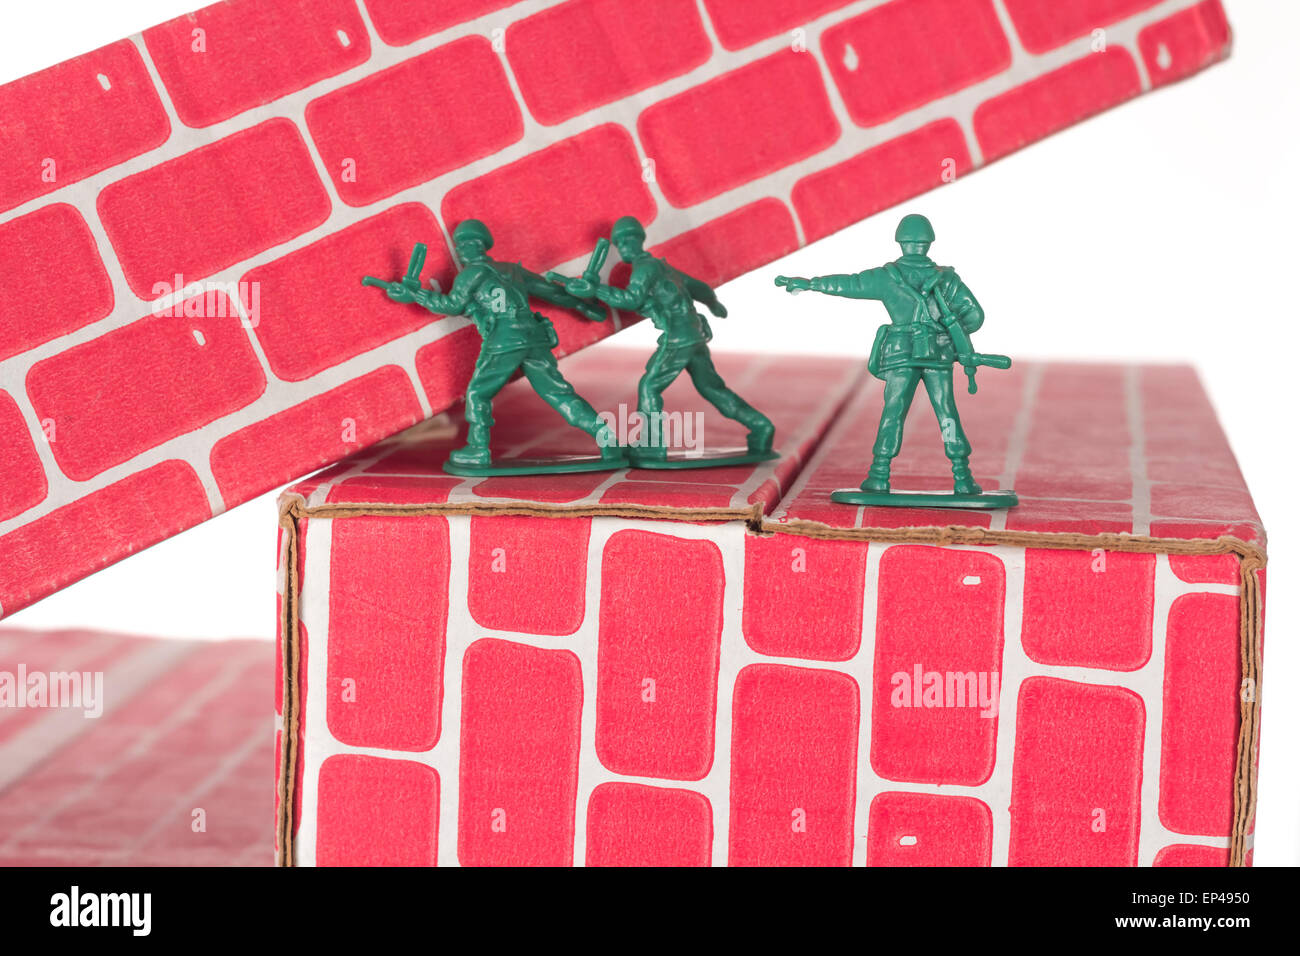 Green army men using teamwork to make progress up the toy brick stairs Stock Photo